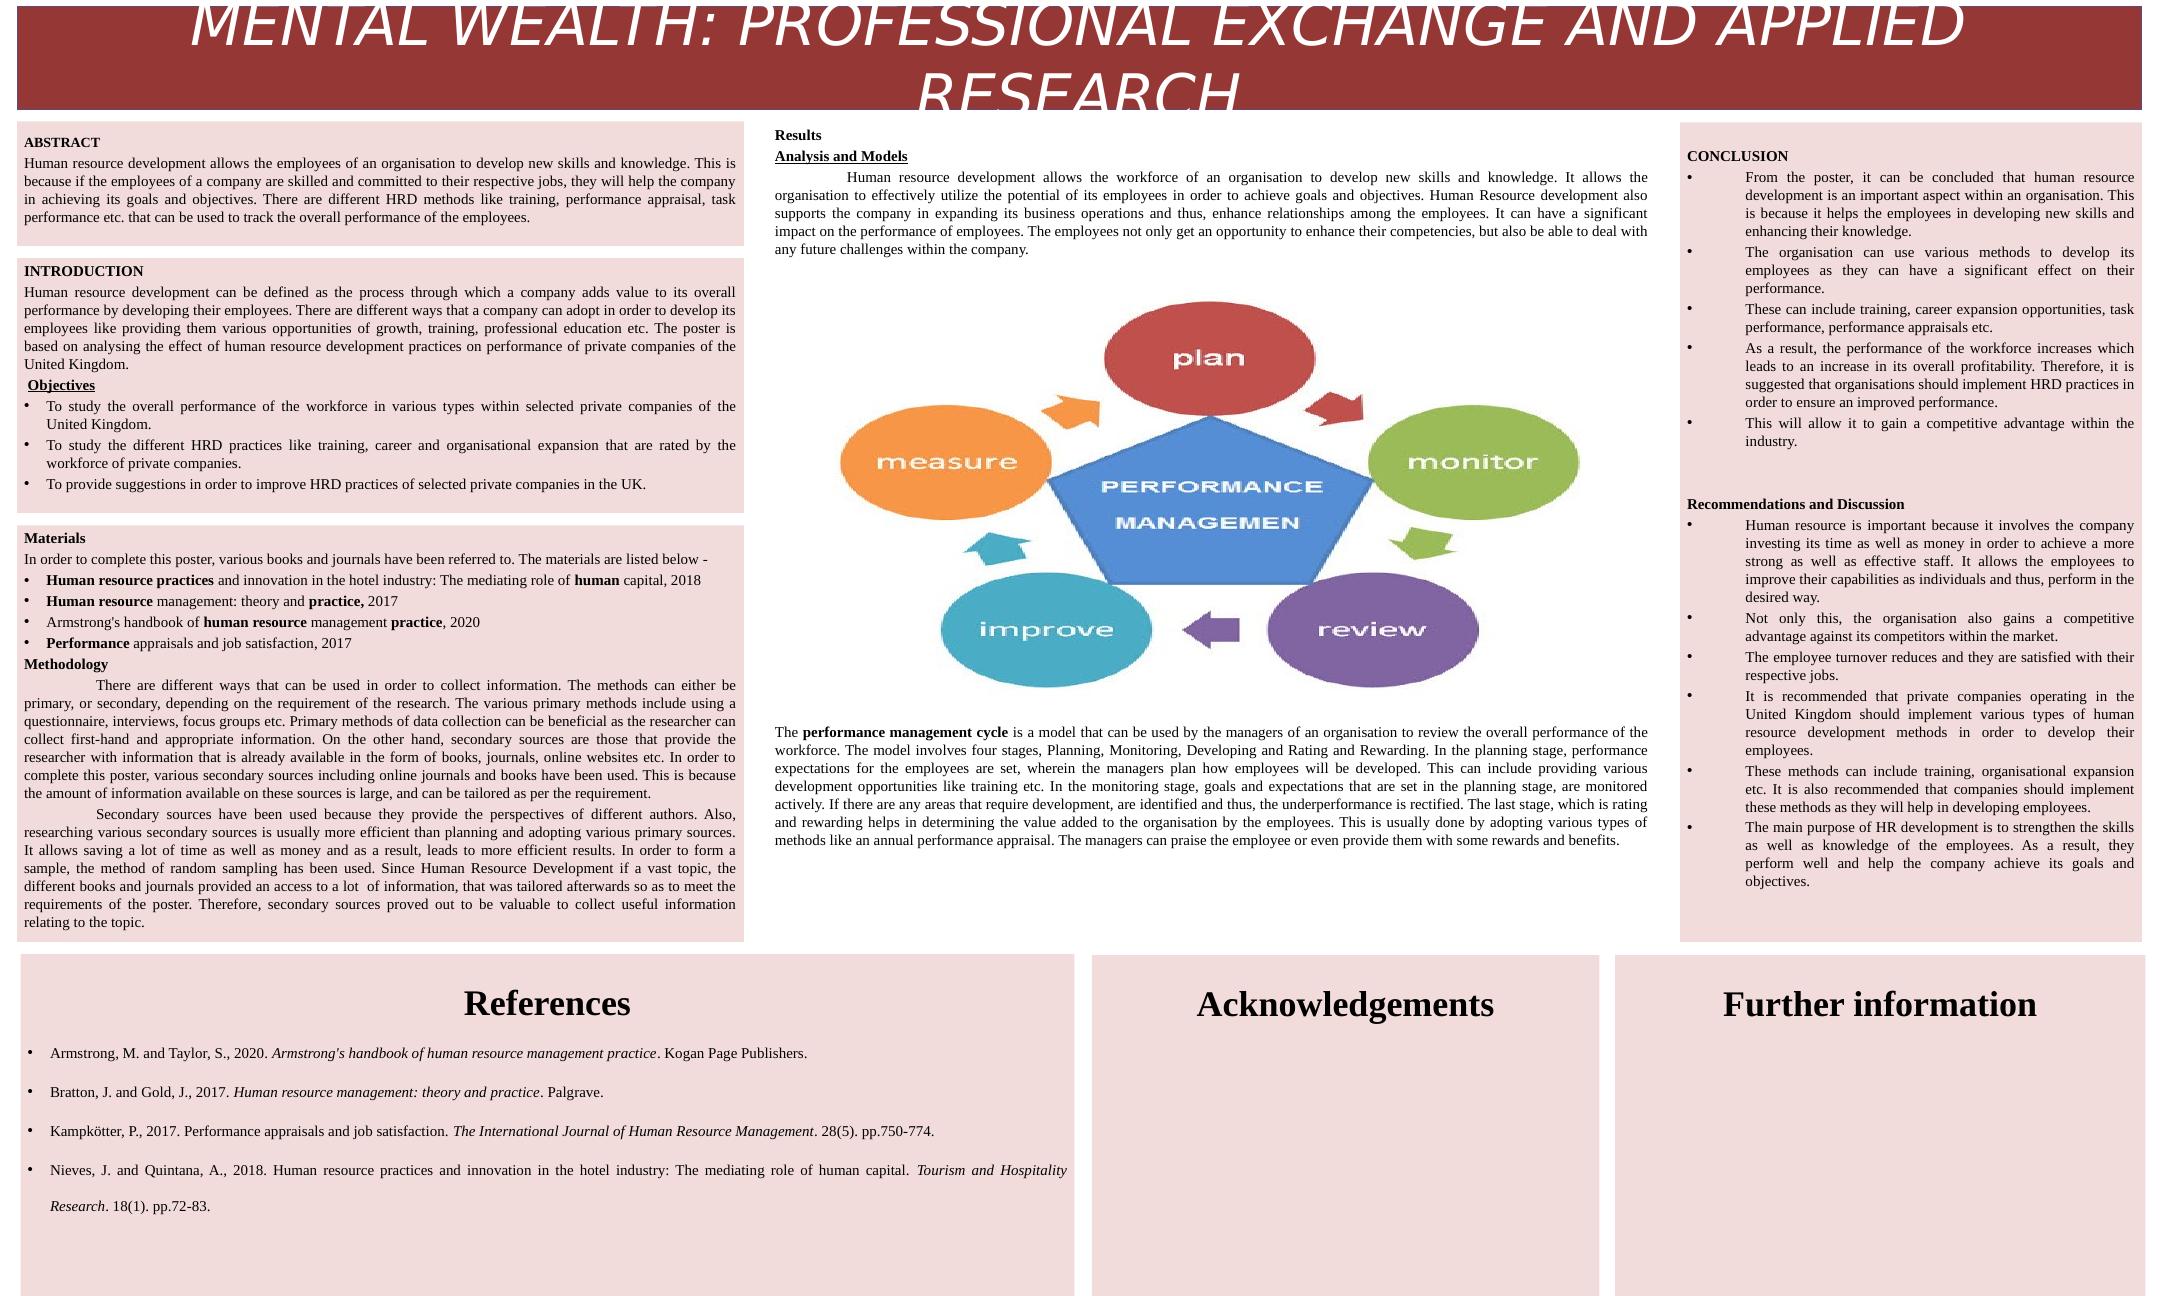 Mental Wealth: Professional Exchange and Applied Research_1